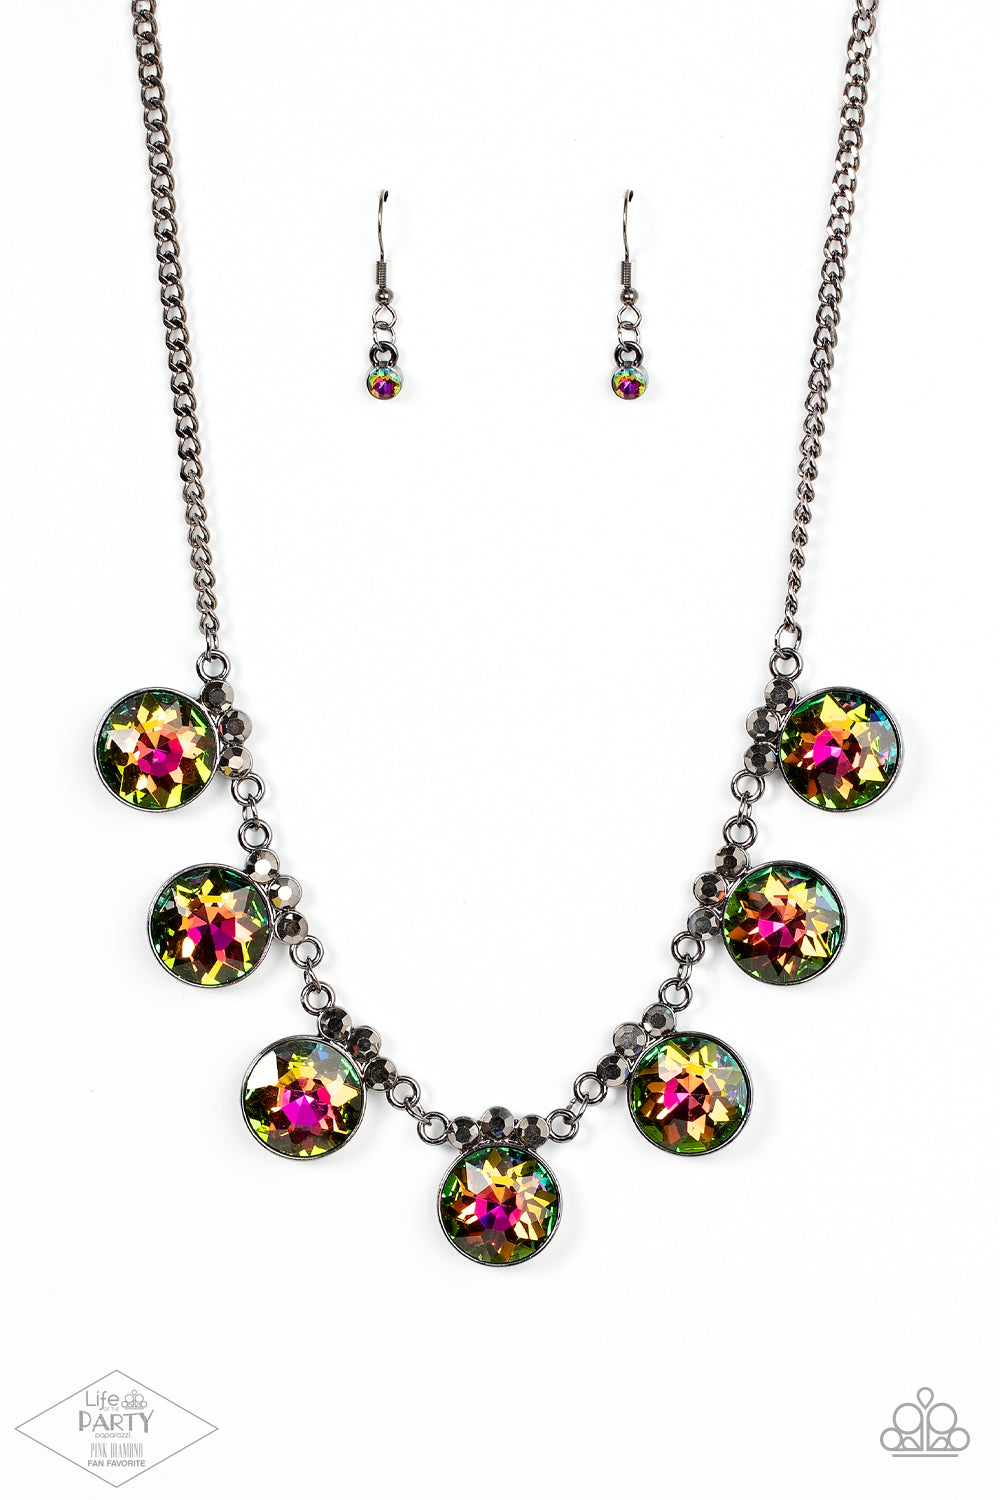 GLOW-Getter Glamour - Oil Spill Multi Necklace -  Life of The Party Pink Diamond Exclusive - A Finishing Touch Jewelry